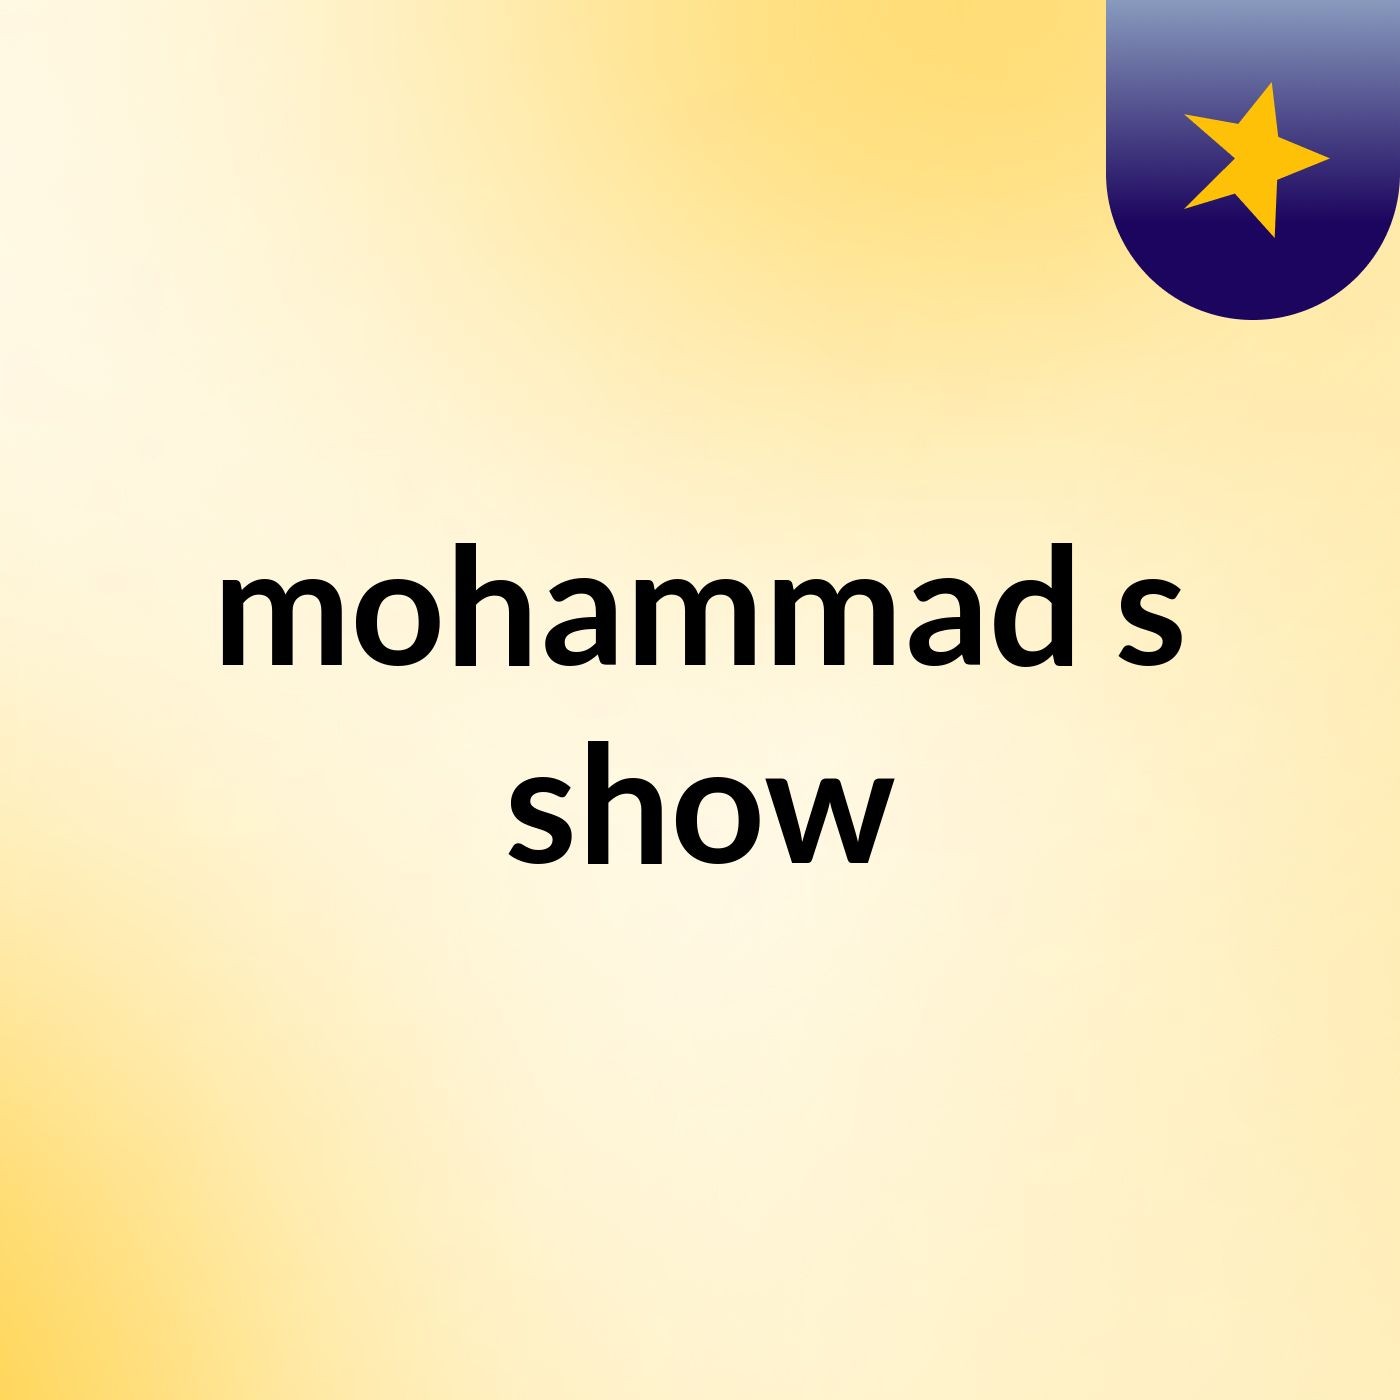 mohammad's show